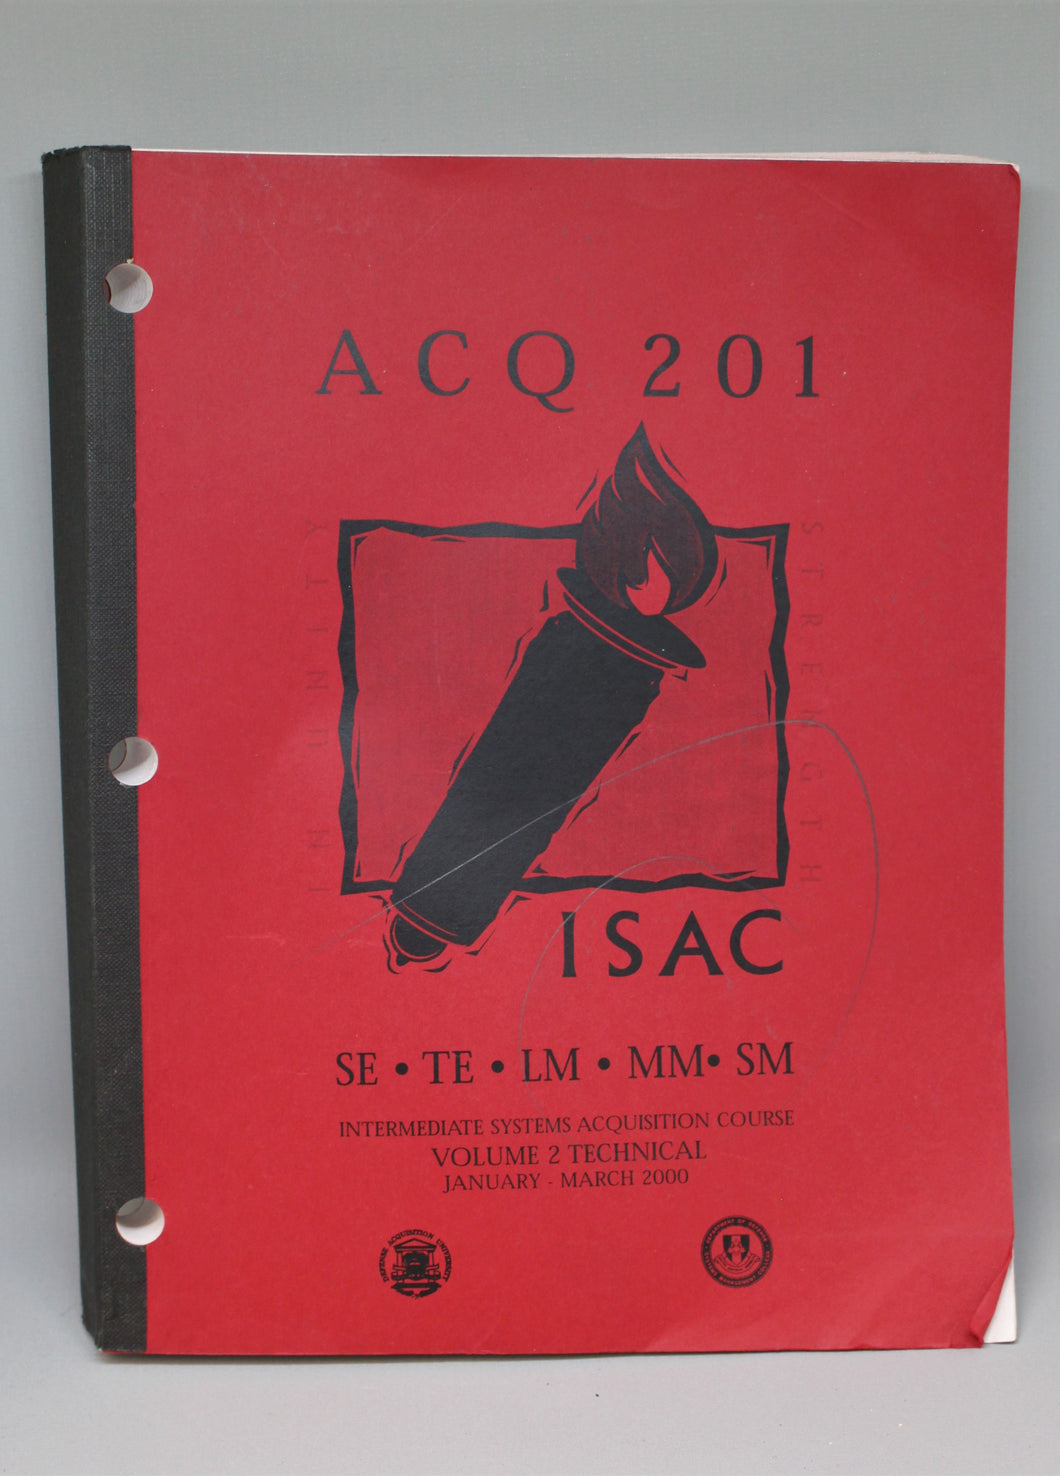 ACQ 201 ISAC, Intermediate Systems Acquisition Course, Jan - March 2000, Vol. 2